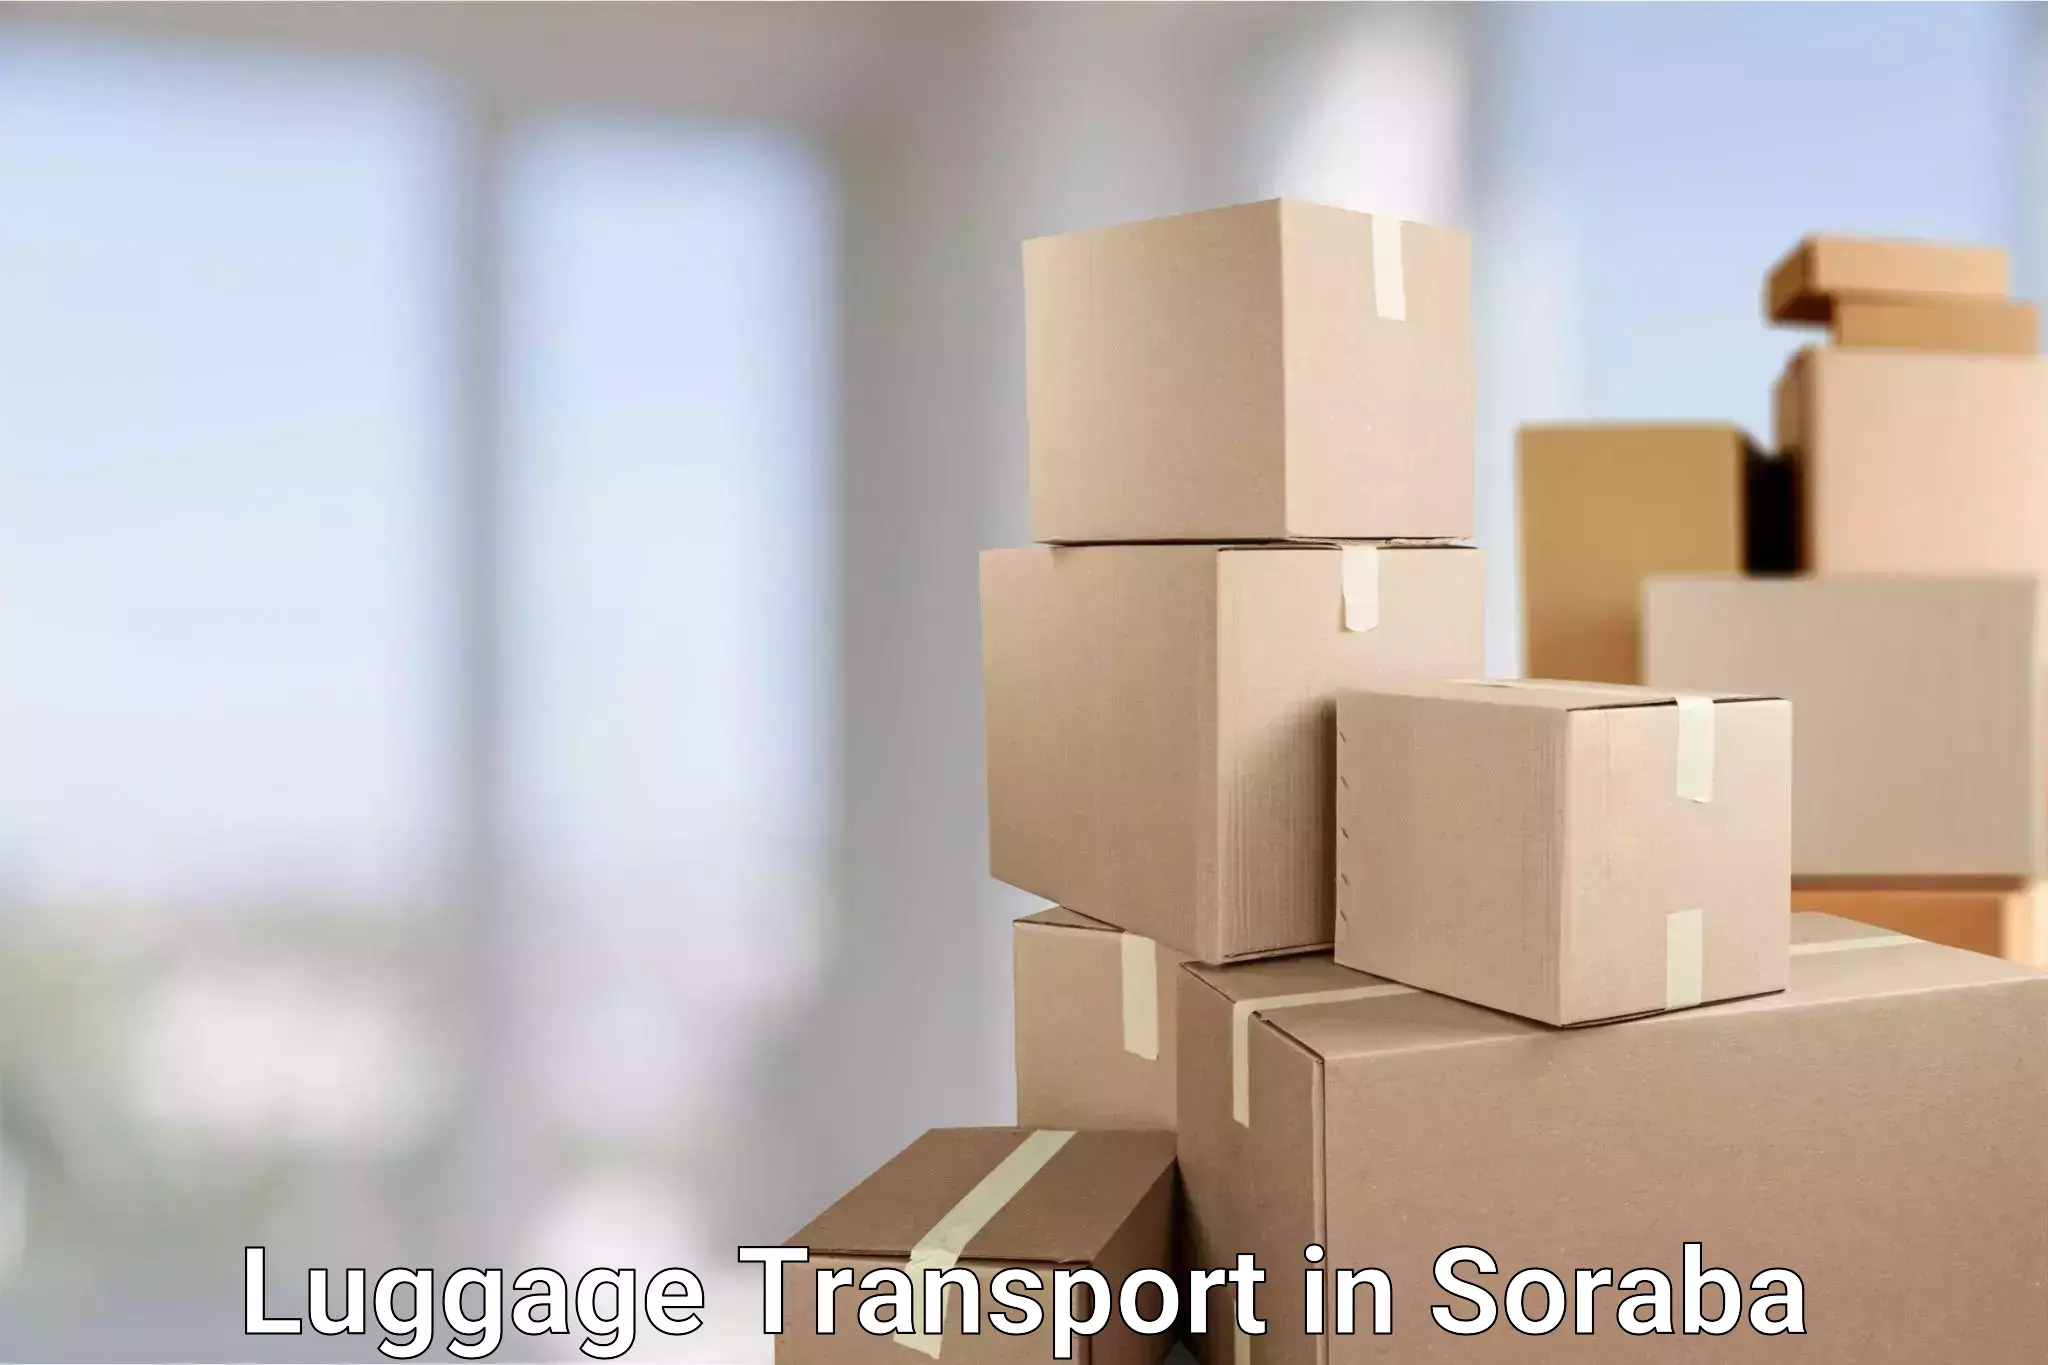 Luggage transport solutions in Soraba